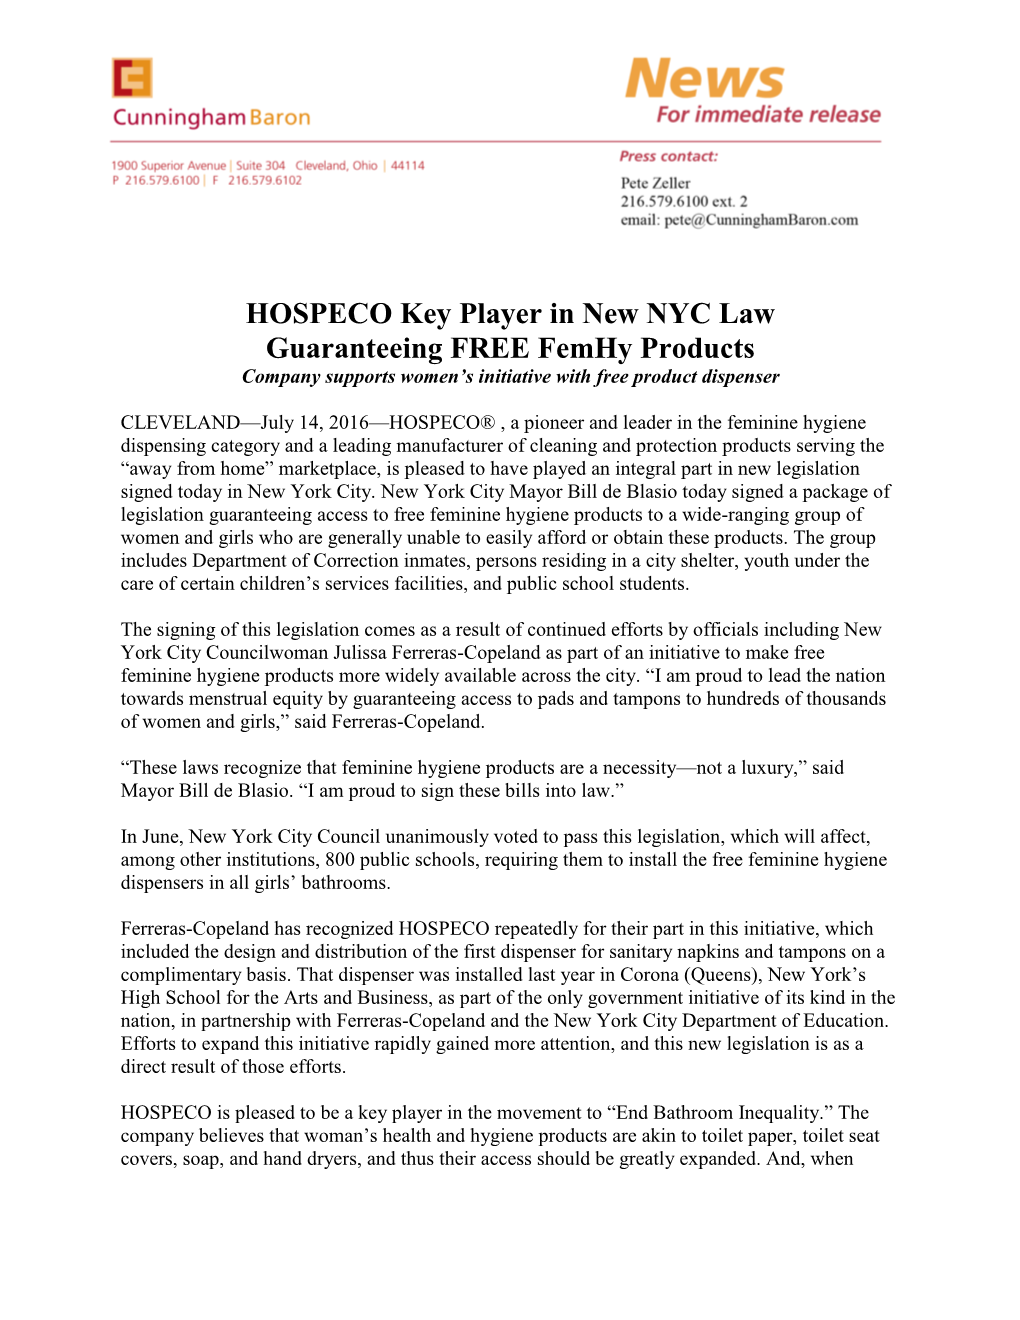 HOSPECO Key Player in New NYC Law Guaranteeing FREE Femhy Products Company Supports Women’S Initiative with Free Product Dispenser